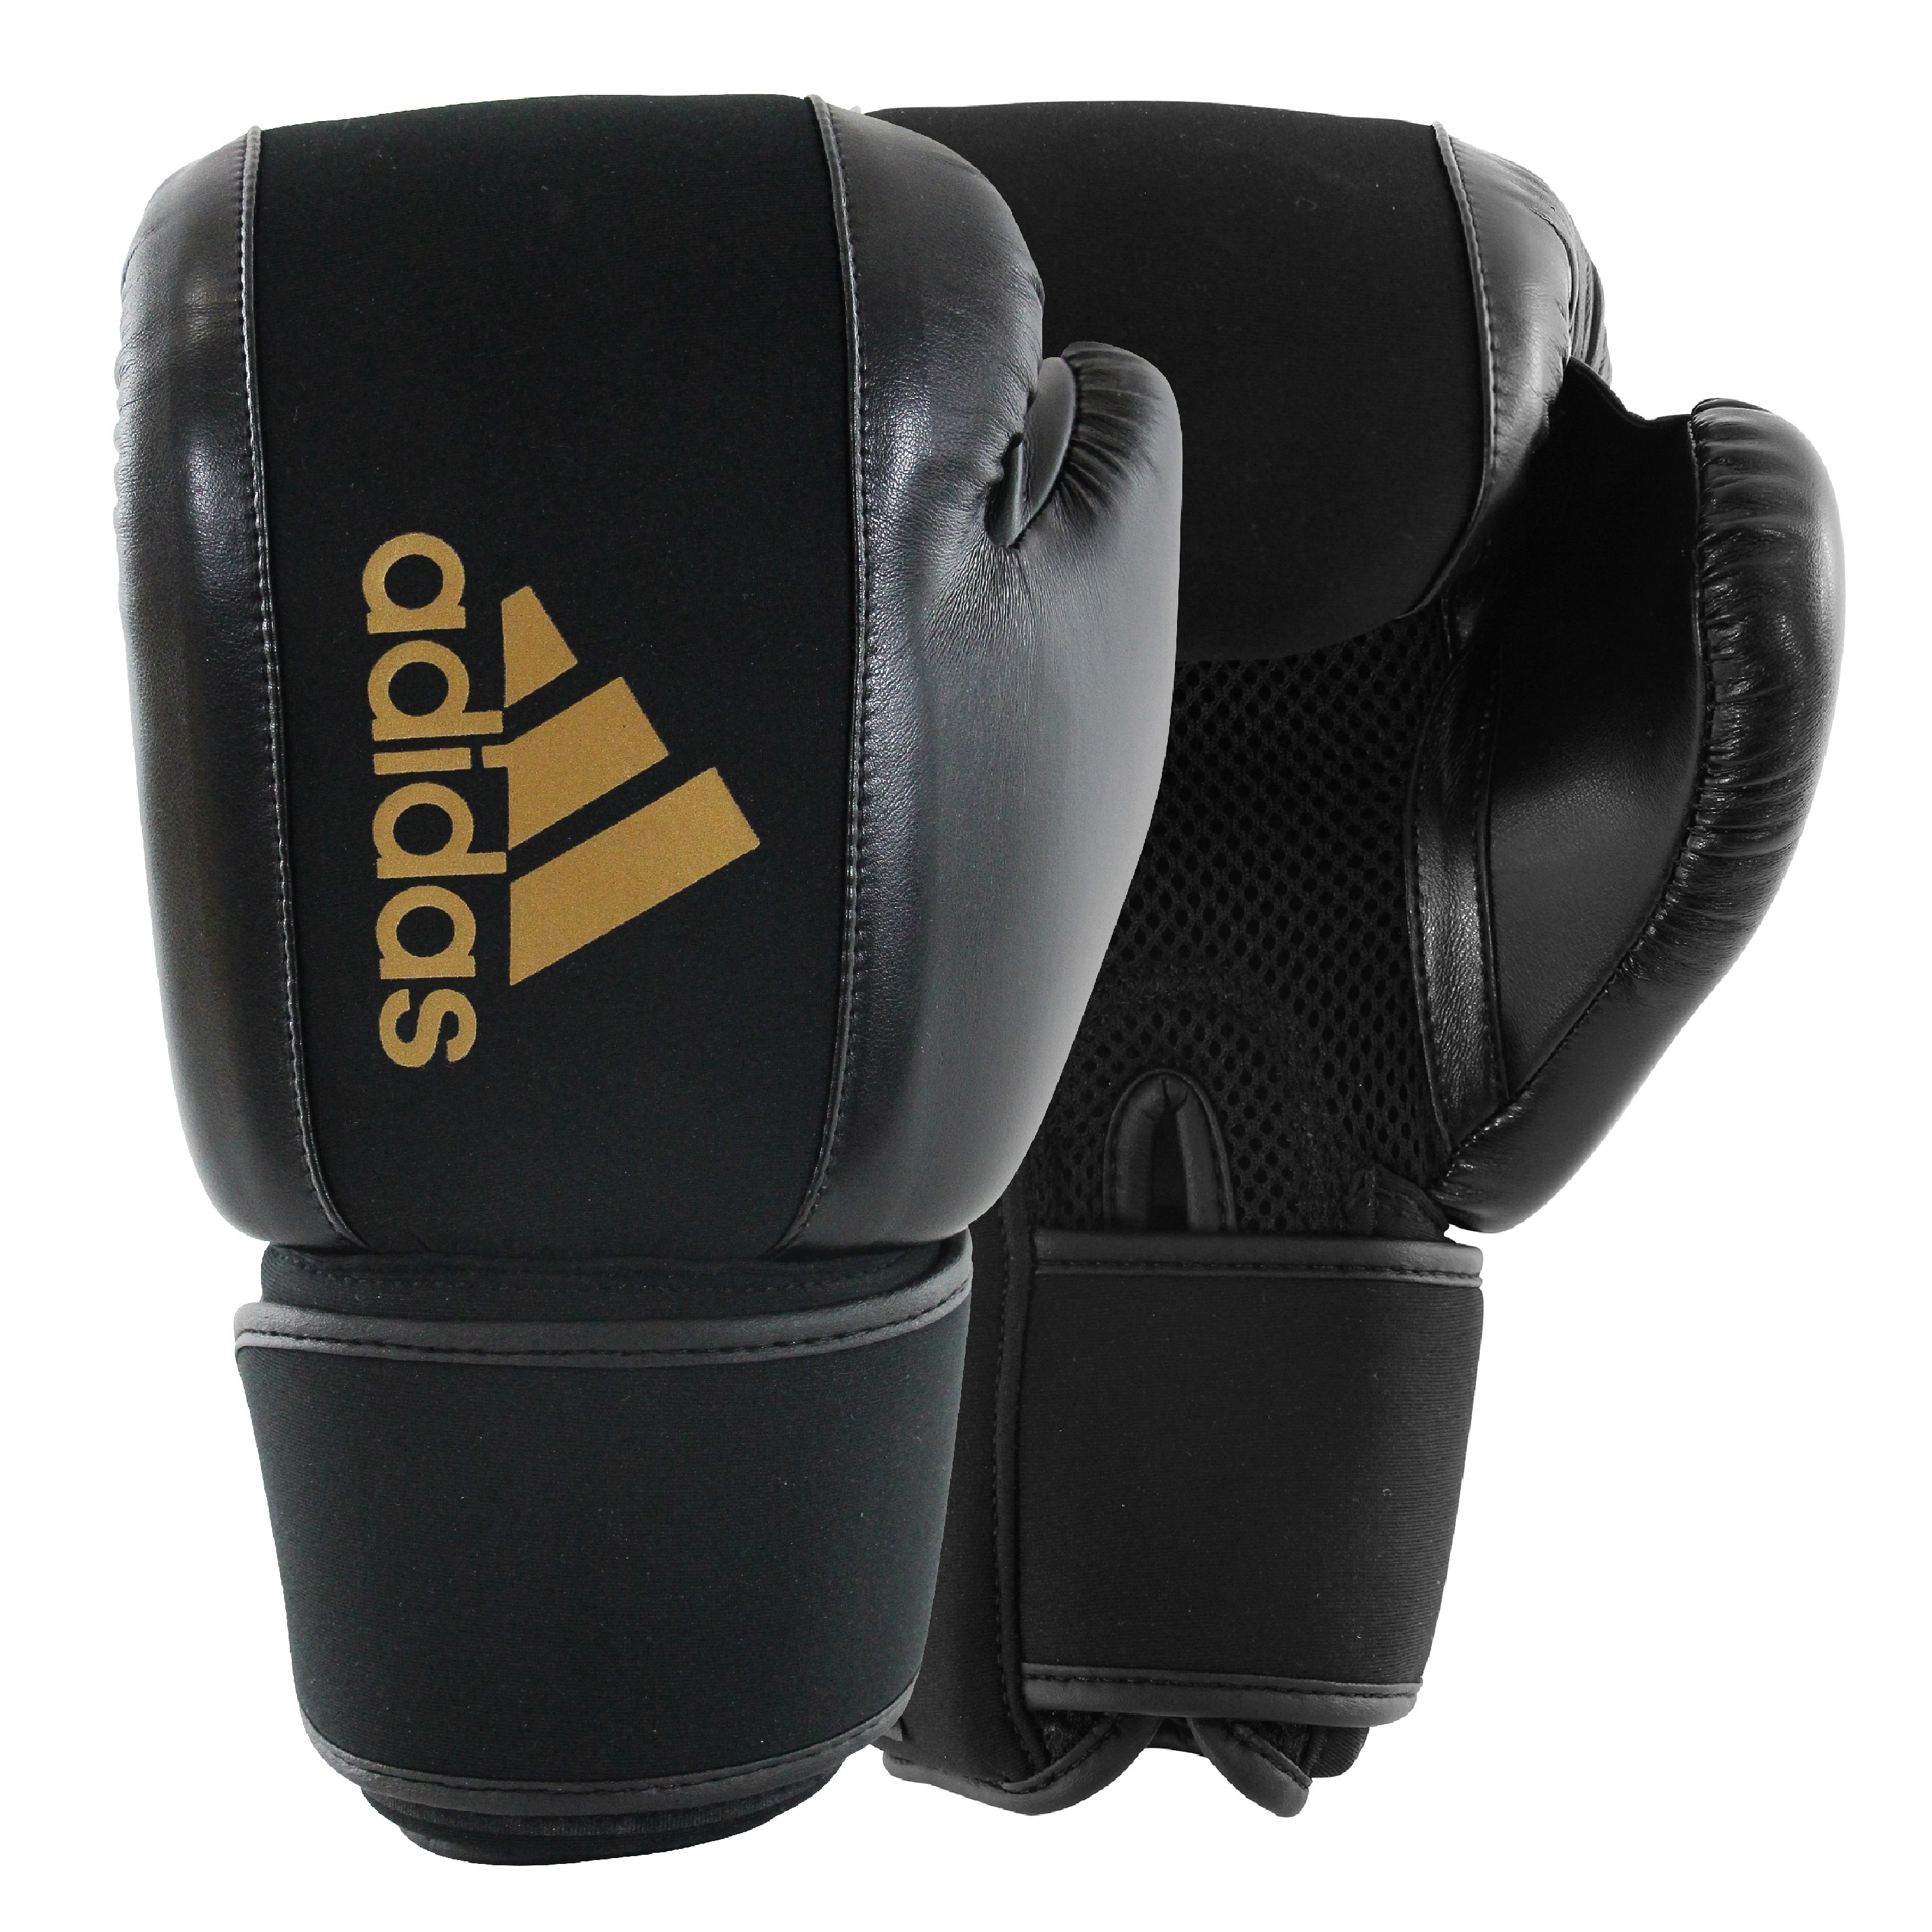 Gloves Boxing 29065439 - Washable adidas & Bed Beyond Bath -